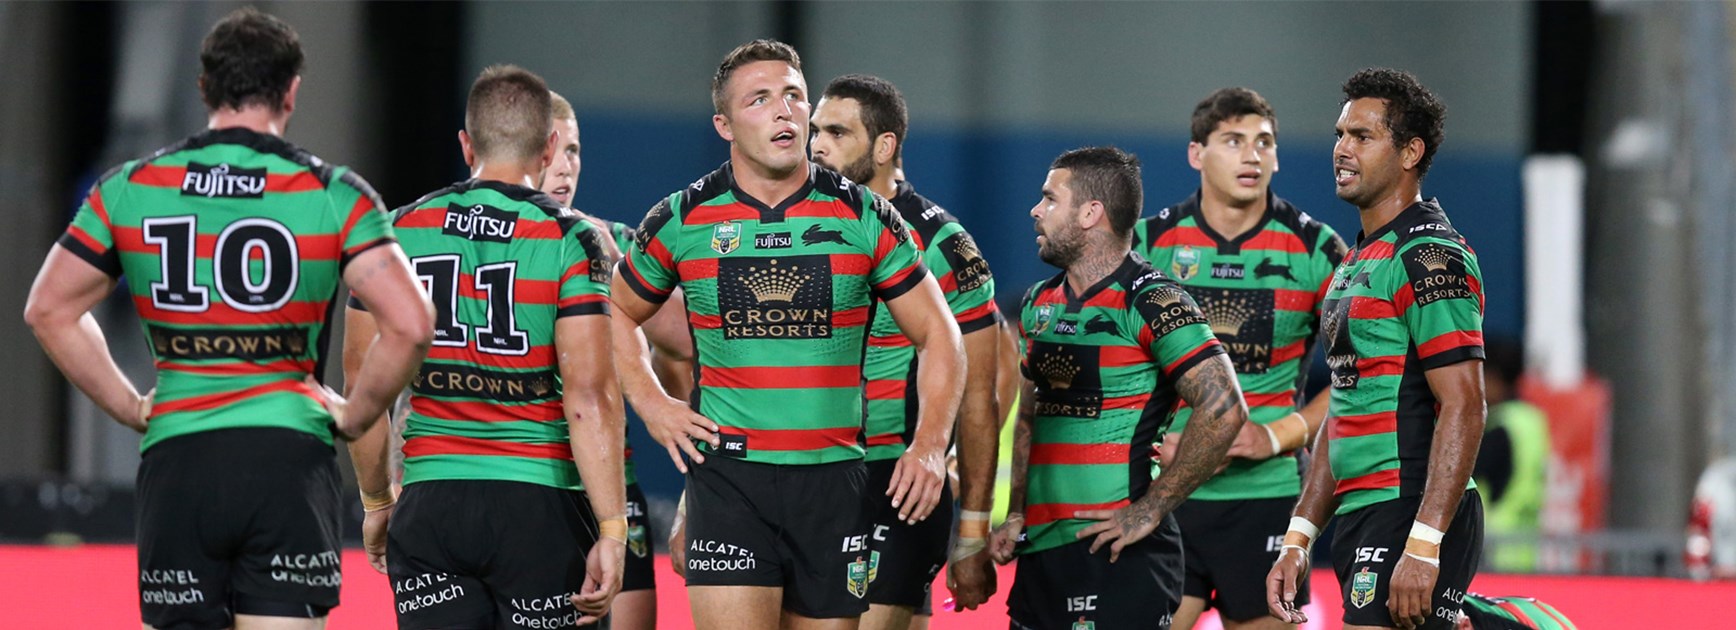 The Rabbitohs struggled badly in the opening 20 minutes against the Tigers in Round 9.